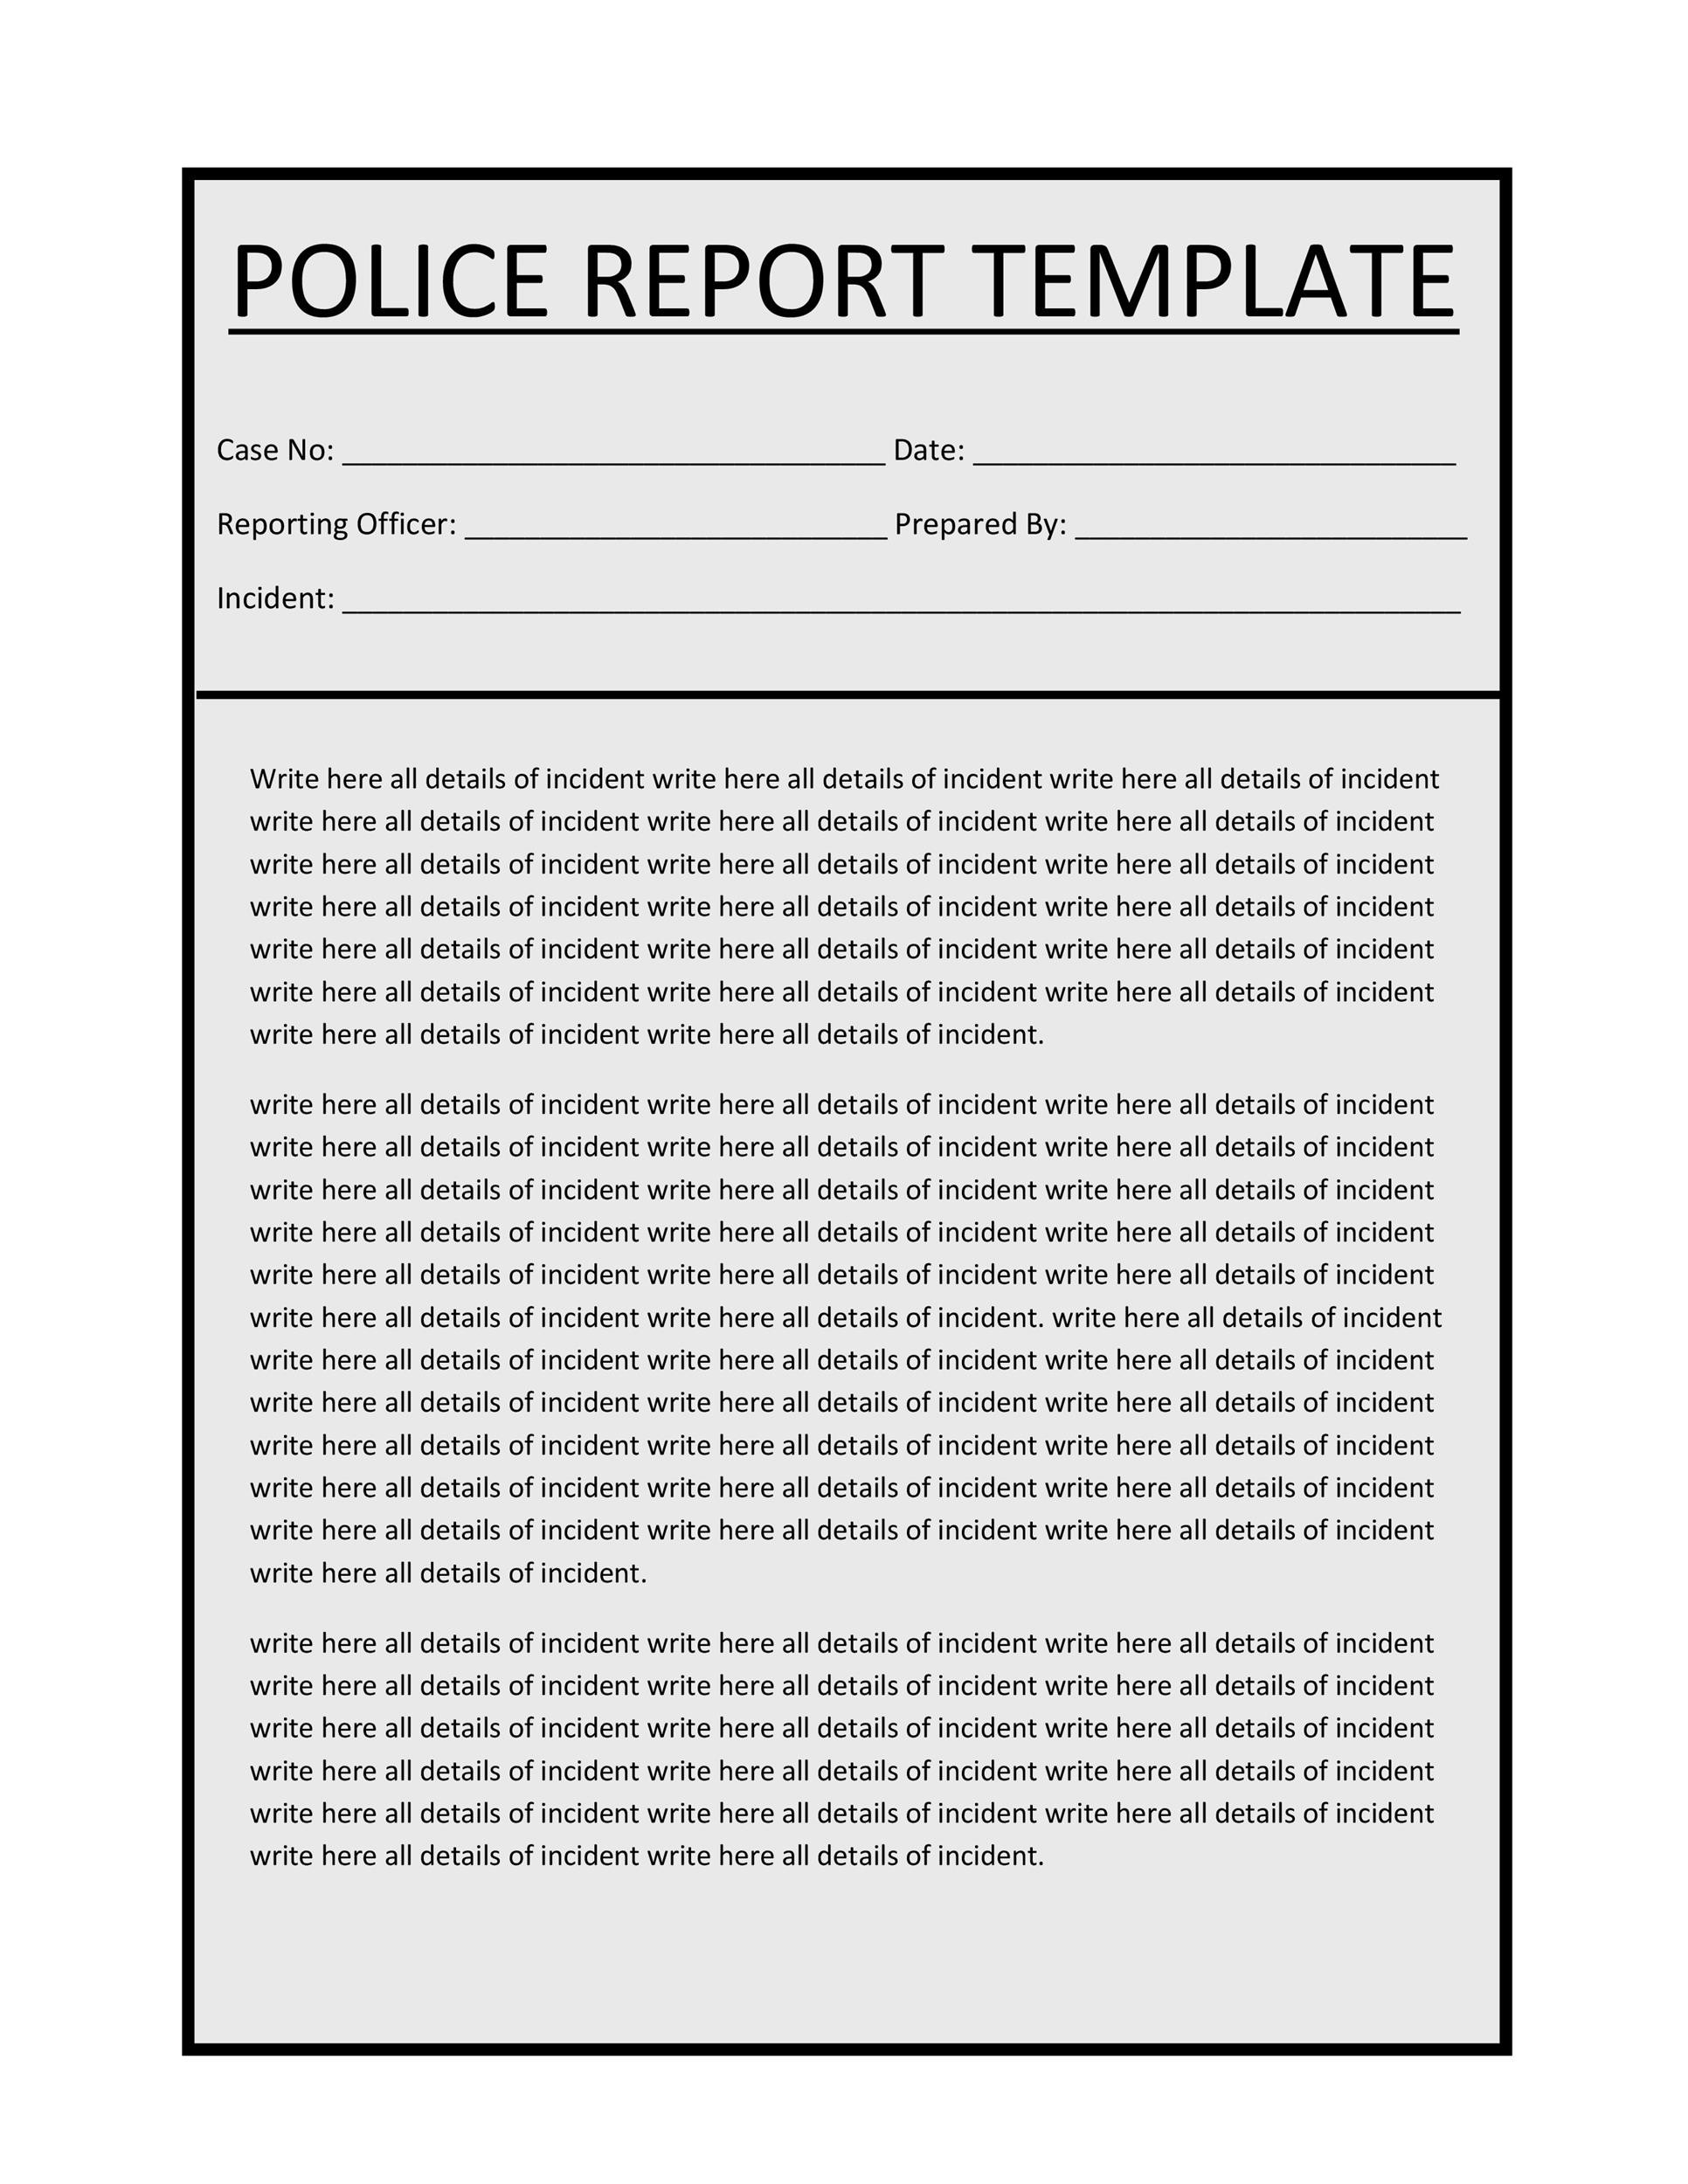 how to make a police report without calling 911